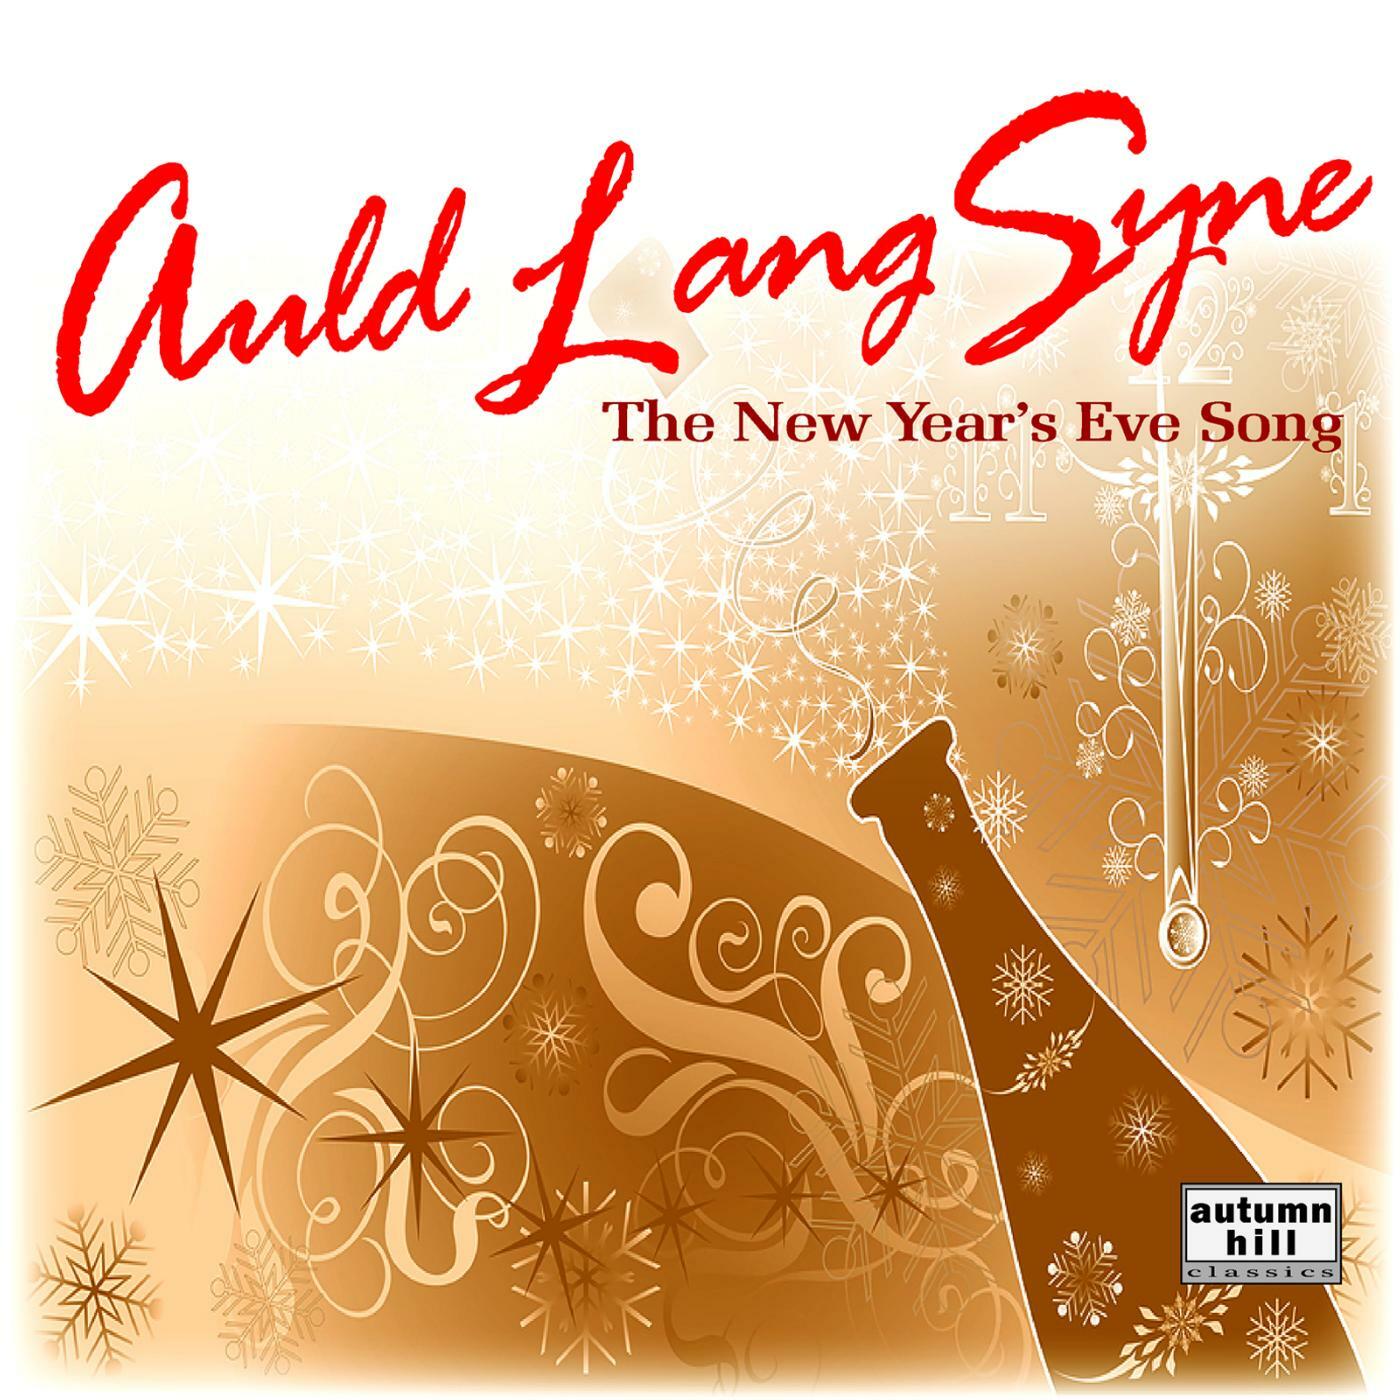 New year's song